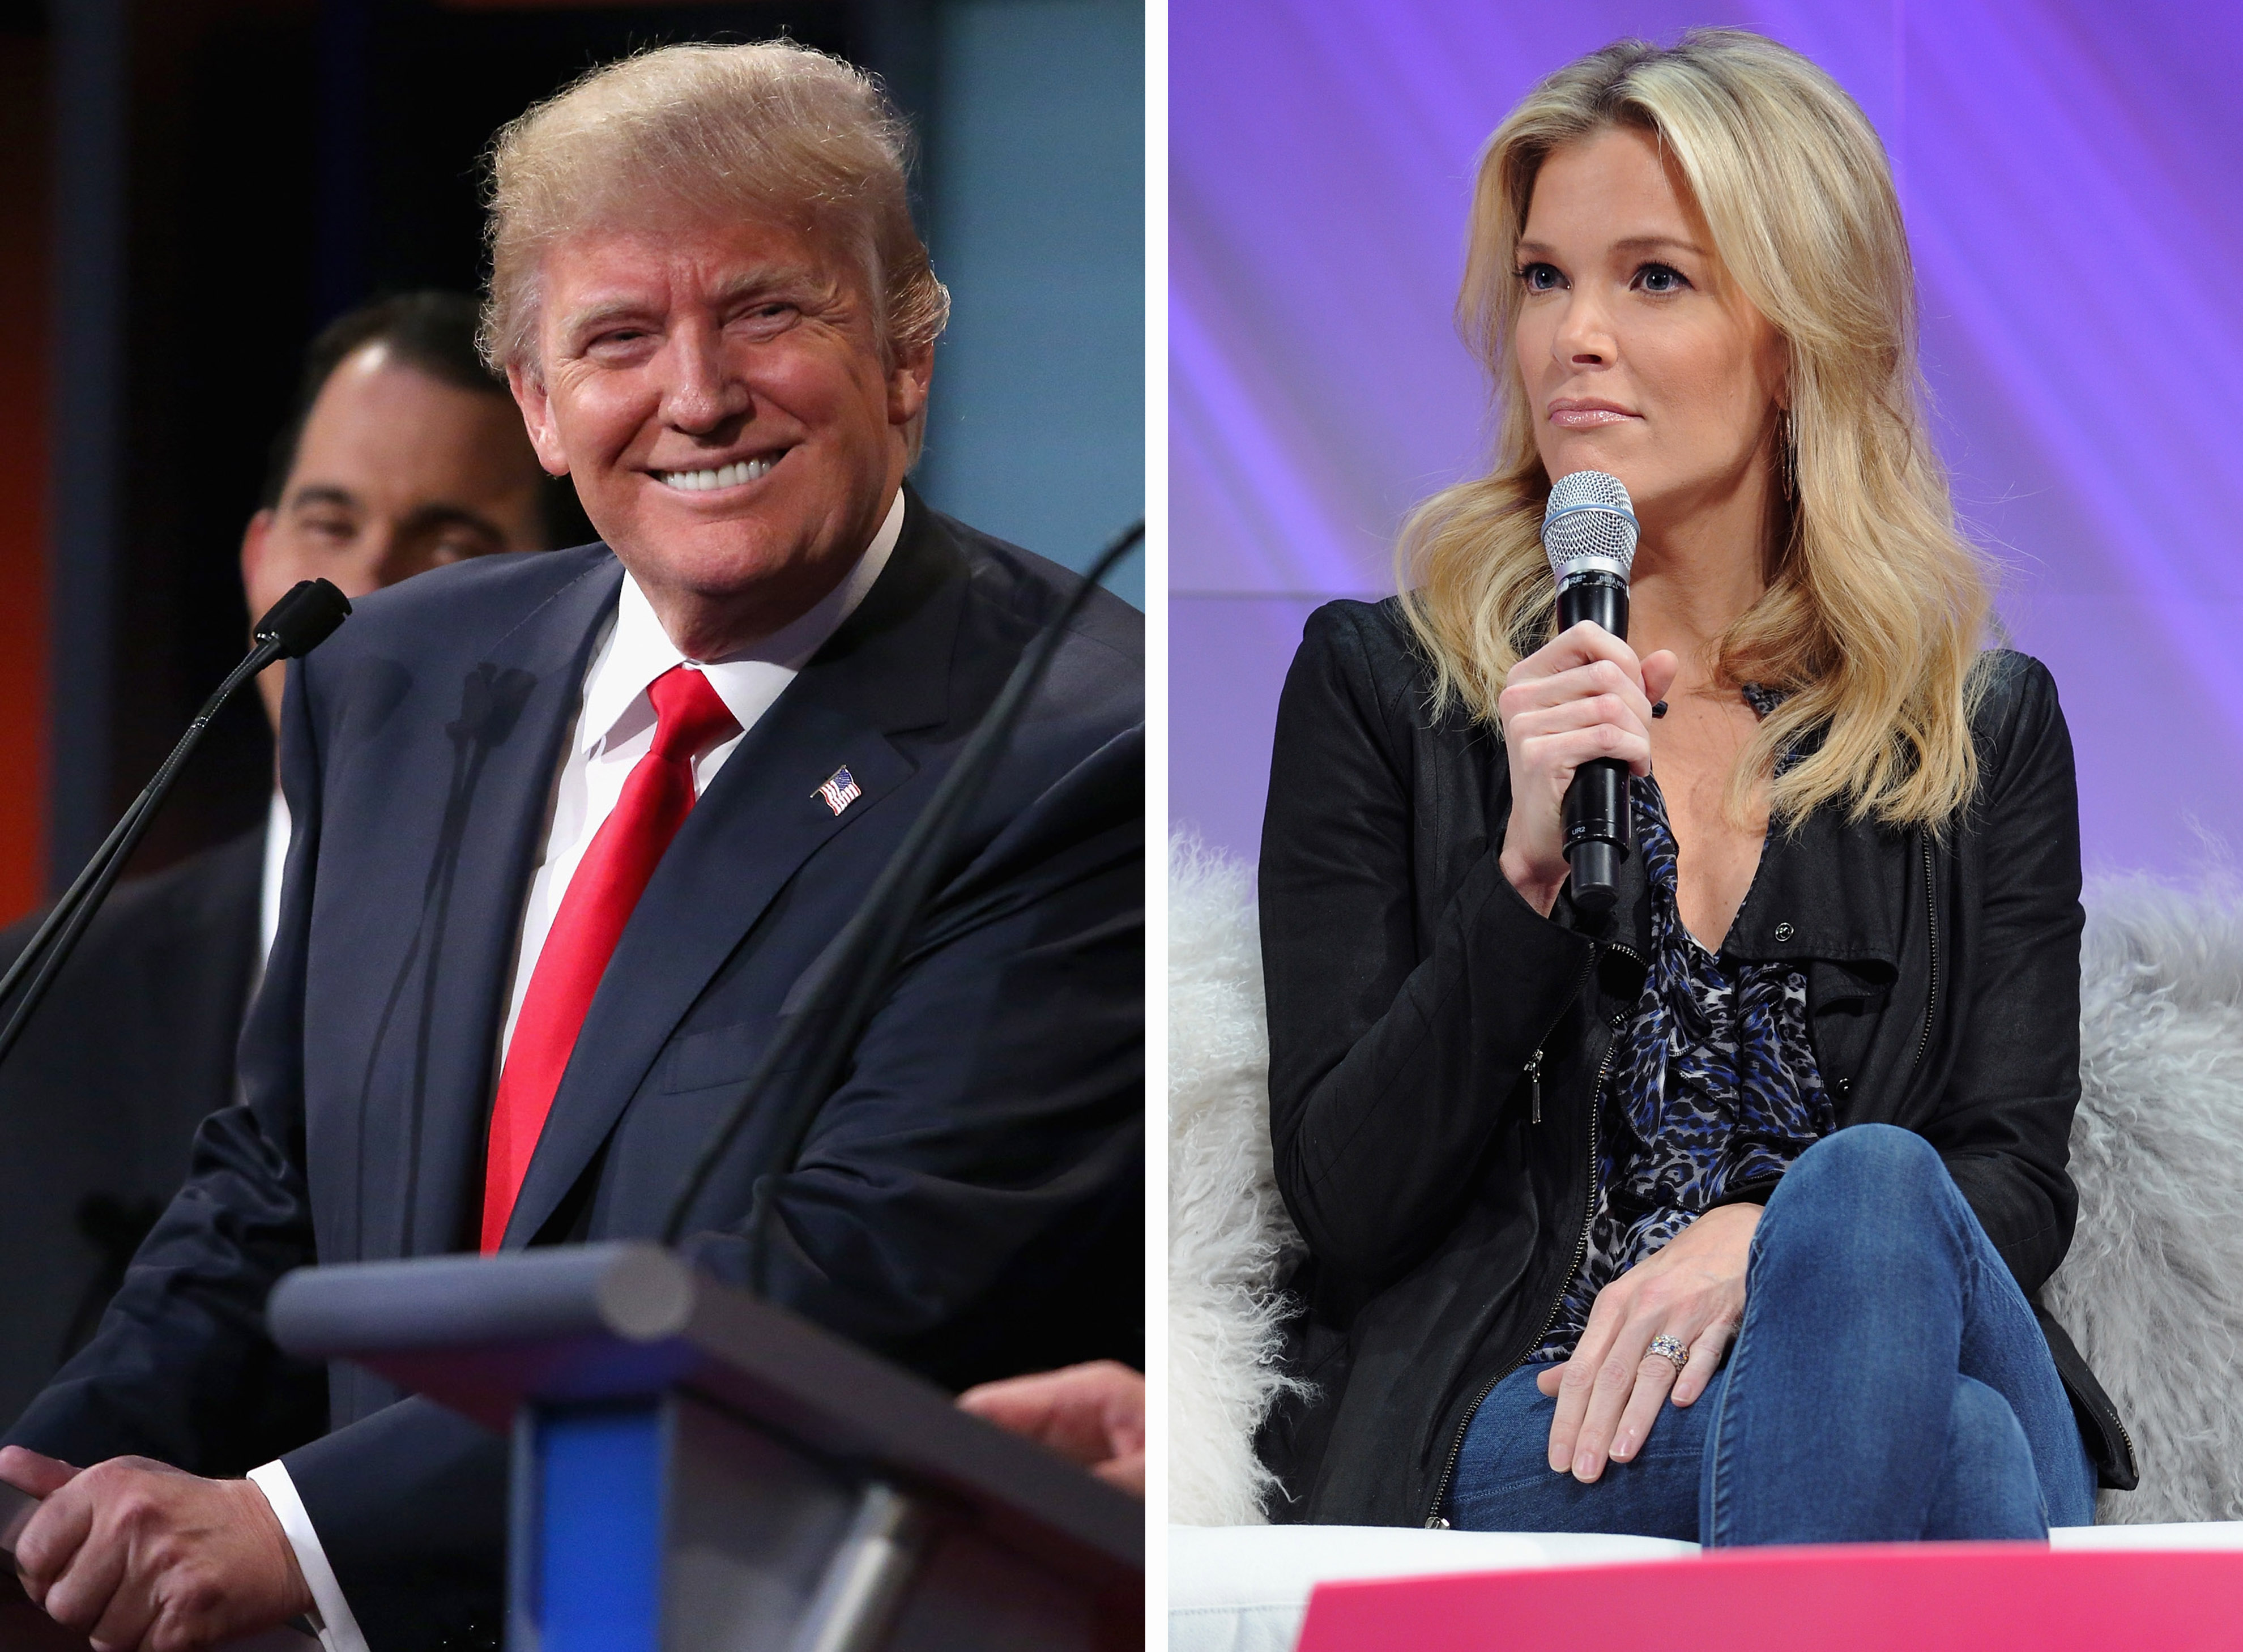 Megyn Kelly responded to Donald Trump on her Fox show "The Kelly File" Monday night.